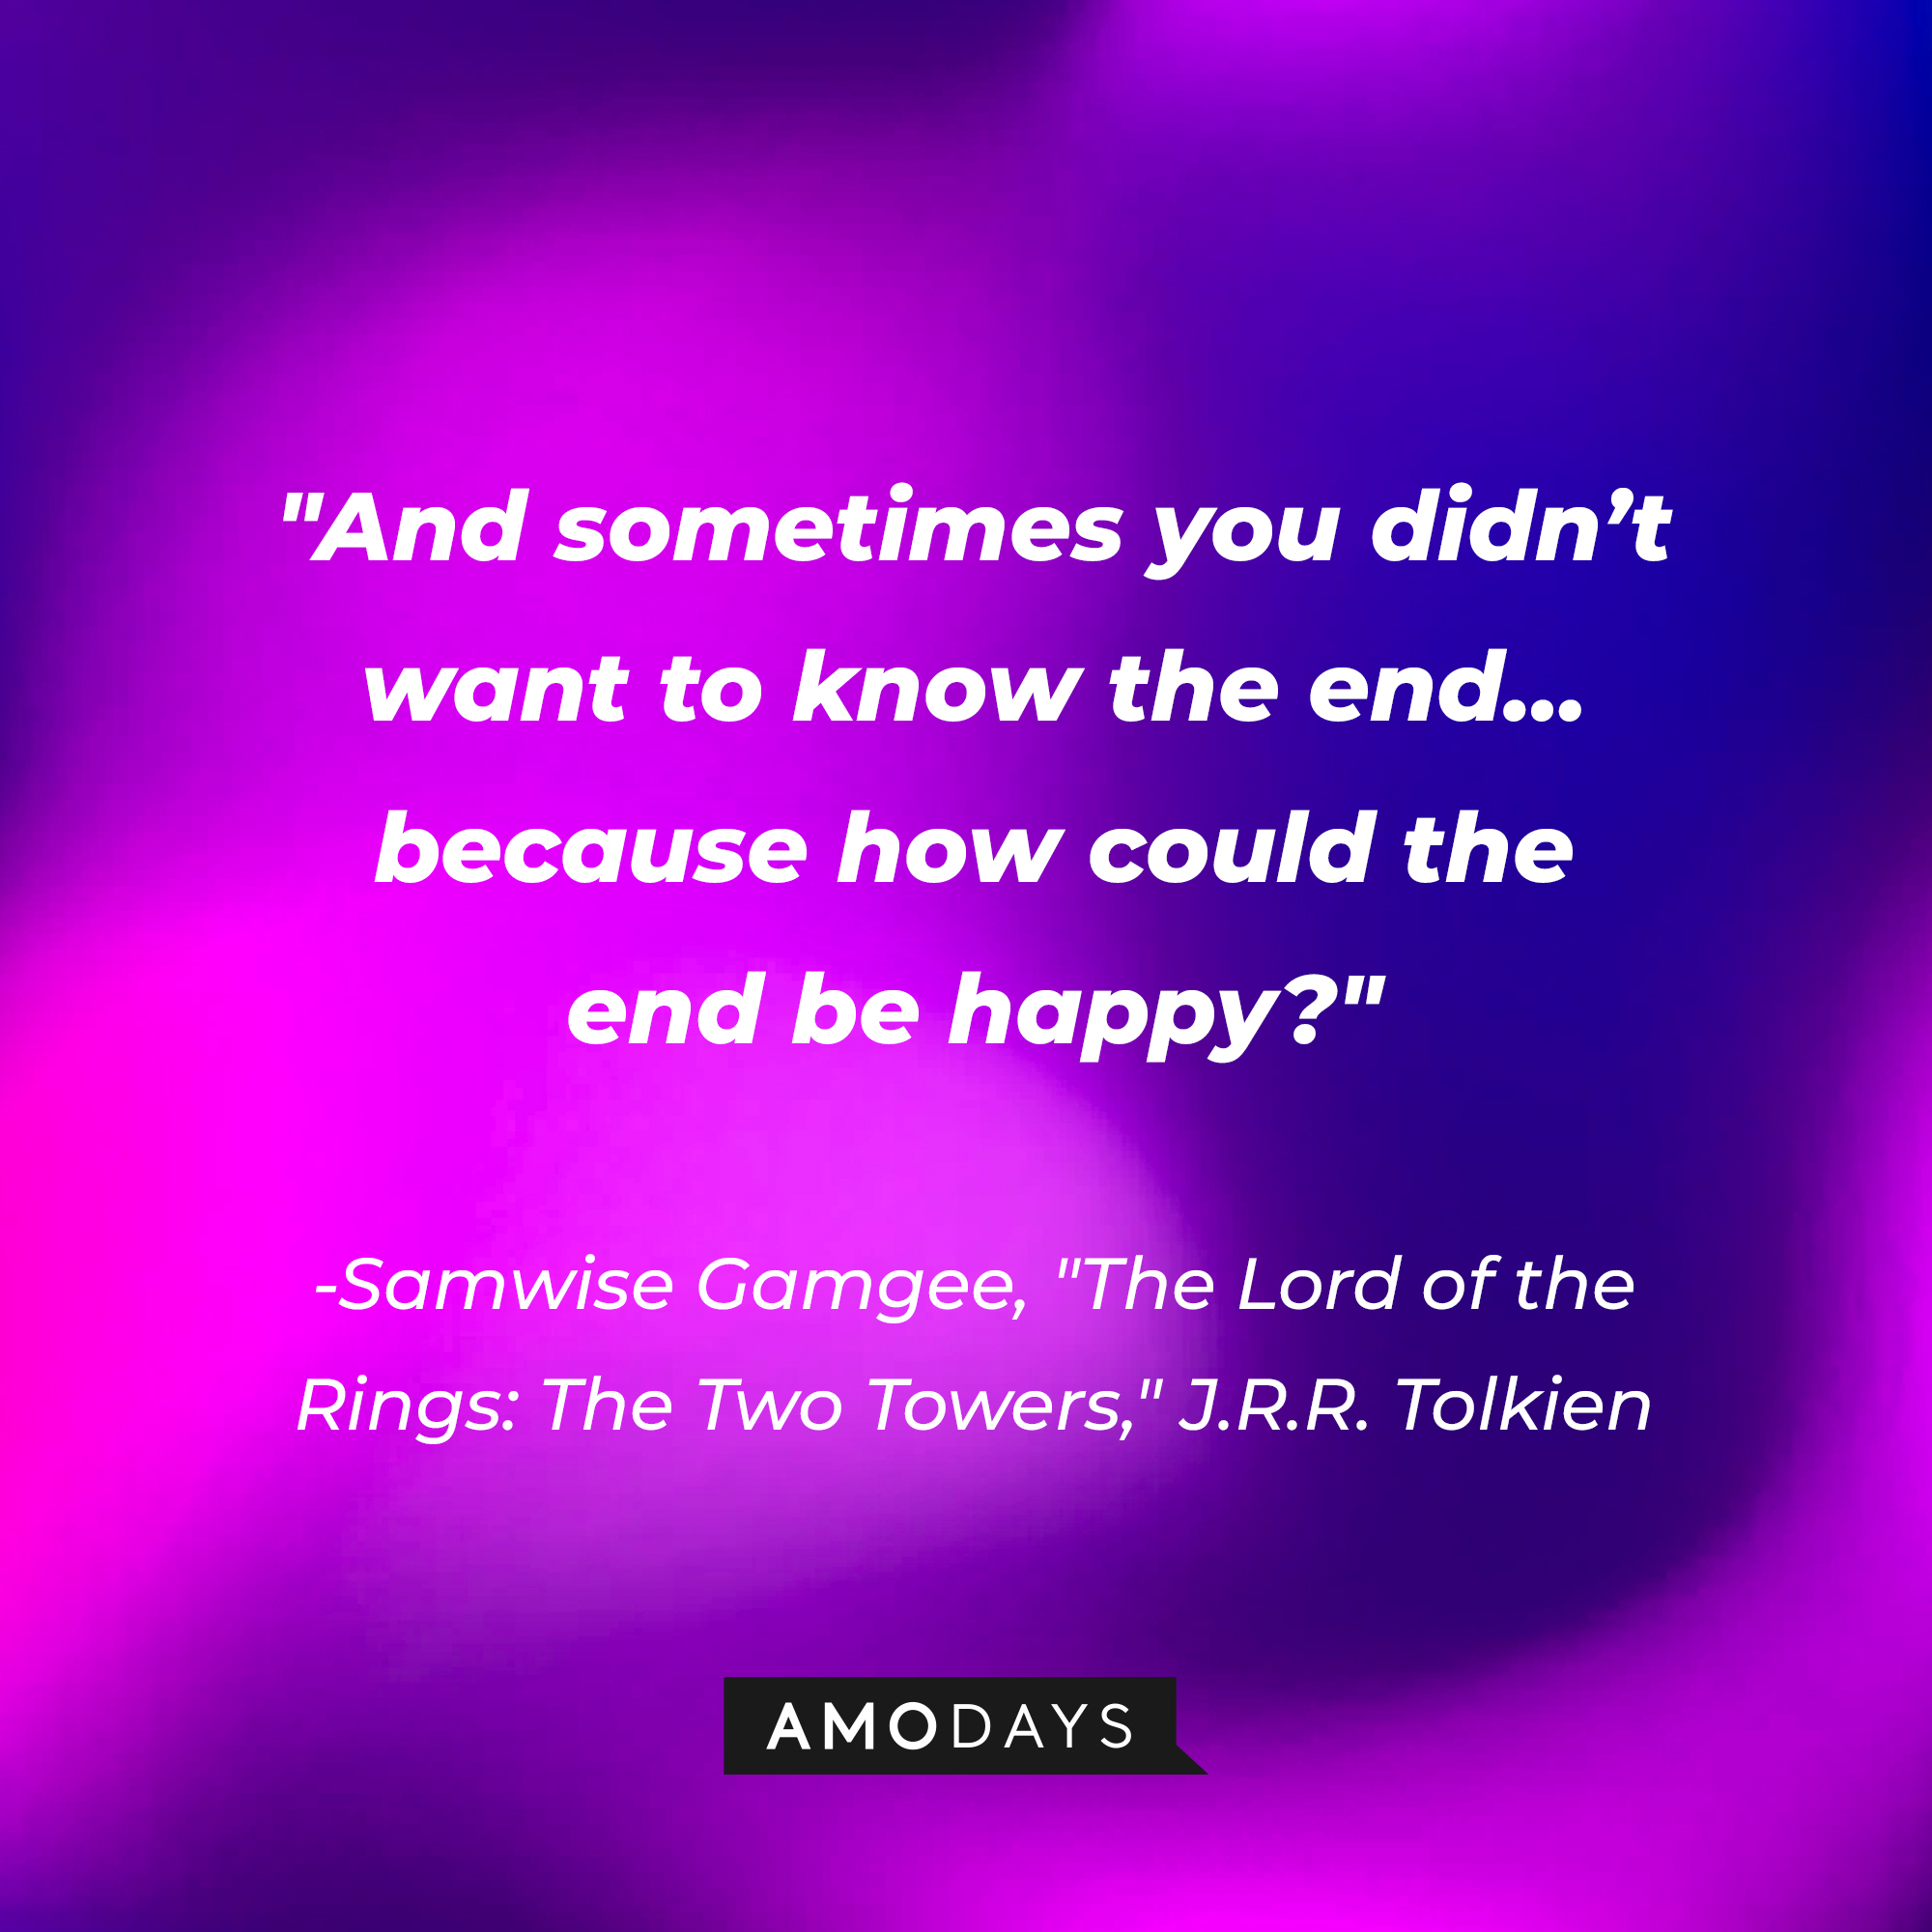 Samwise Gamgee’s quote from “The Lord of the Rings: The Two Towers” J.R.R Tolkien: “And sometimes you didn’t want to know the end… because how could the end be happy?”| Source: AmoDays